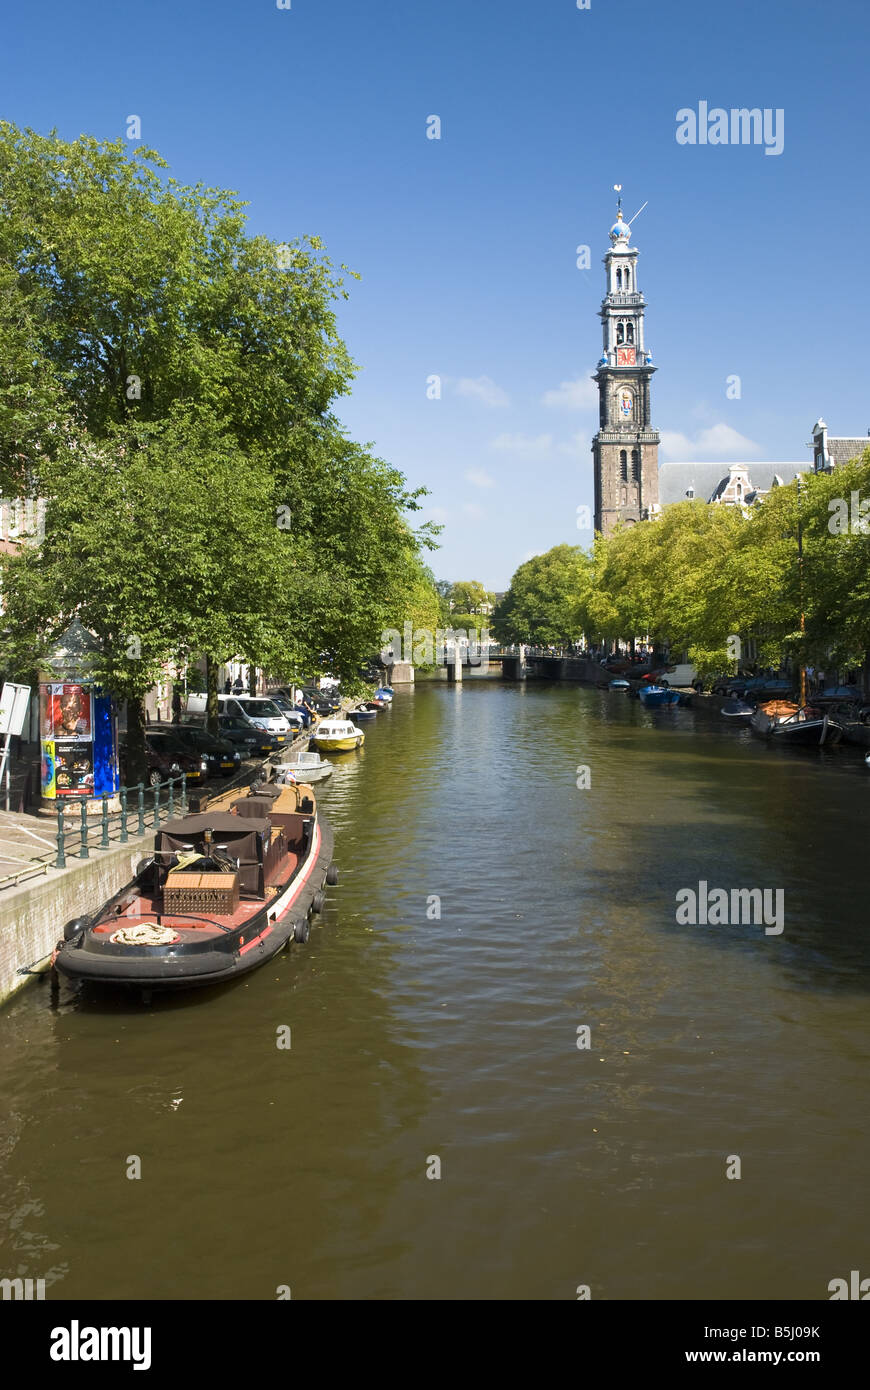 A tree lined canal in Amsterdam, The Netherlands. Stock Photo